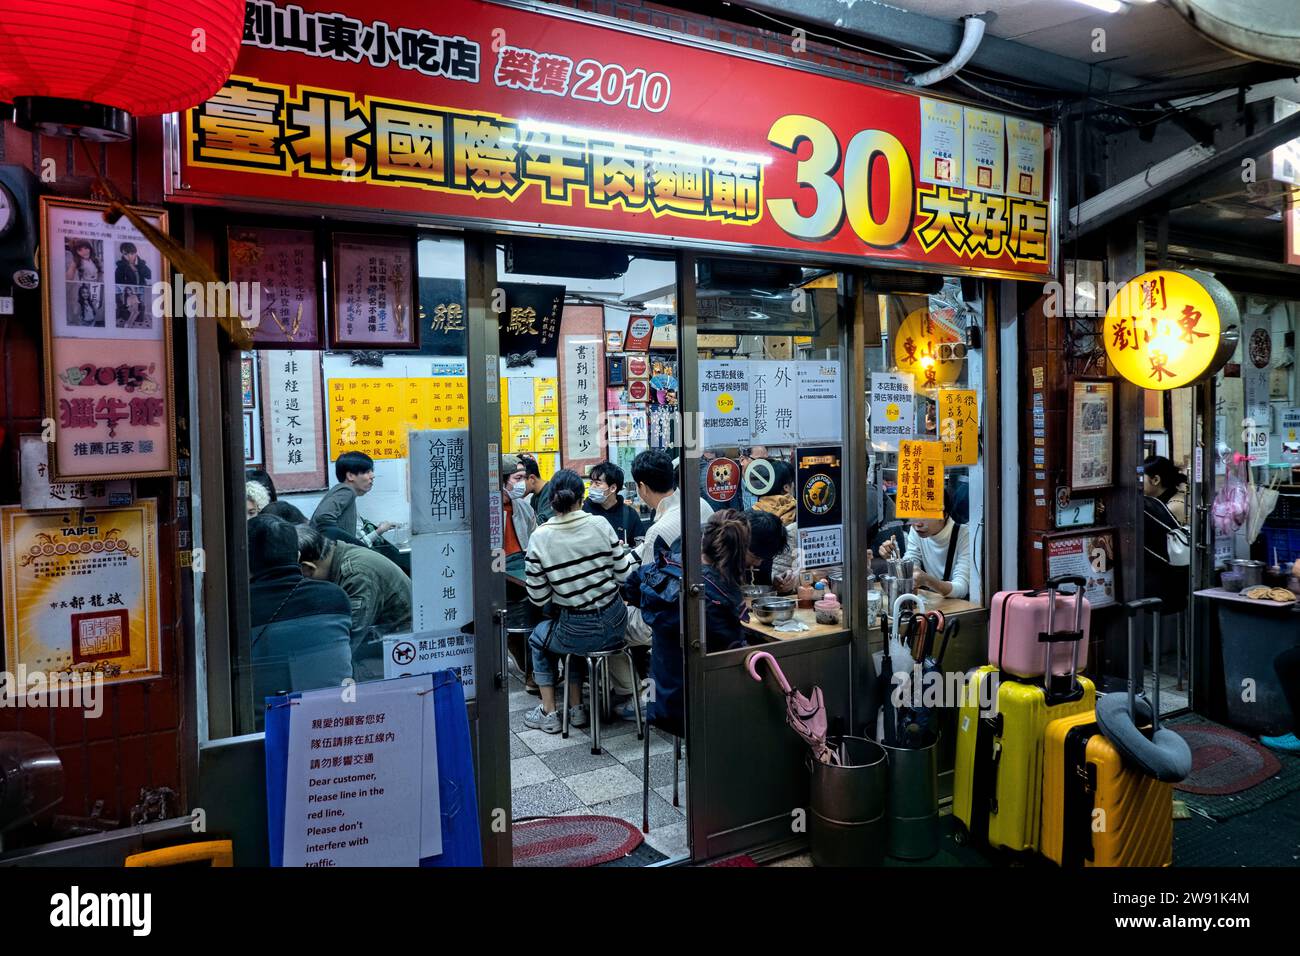 Hole in the wall Michelin-awarded beef noodle restaurant Liu Shandong, Taipei, Taiwan Stock Photo